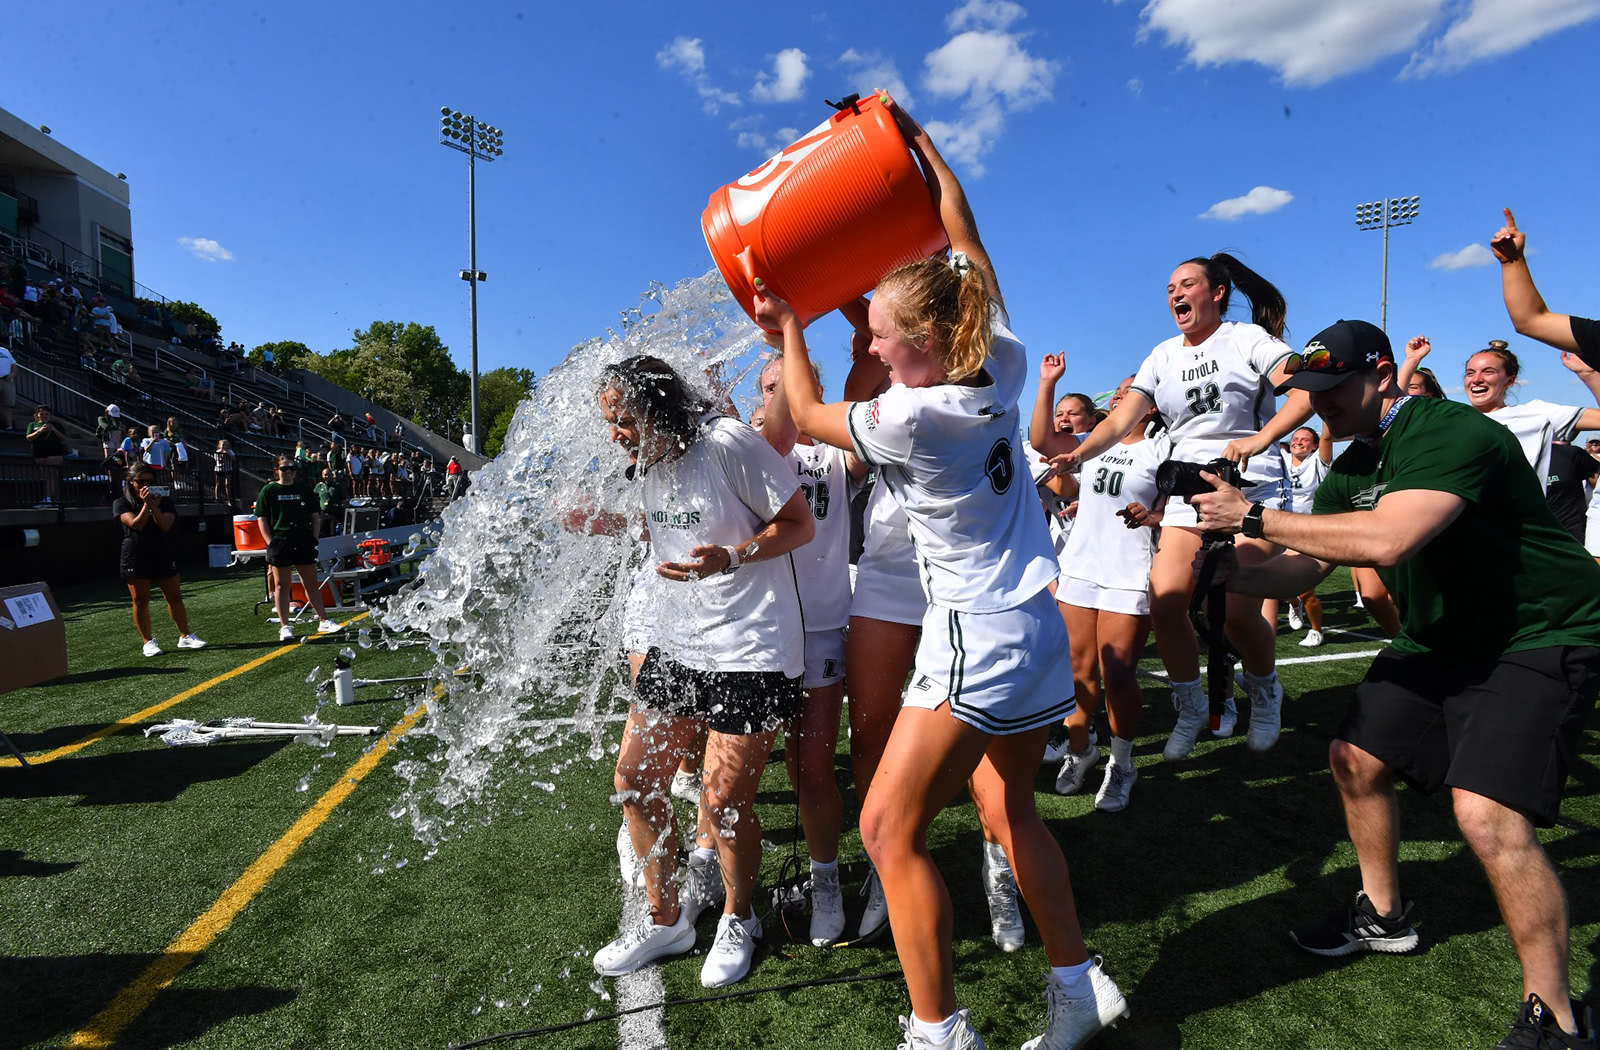 Loyola's women's lacrosse team celebrating a victory by dumping a Gatorade cooler on a player